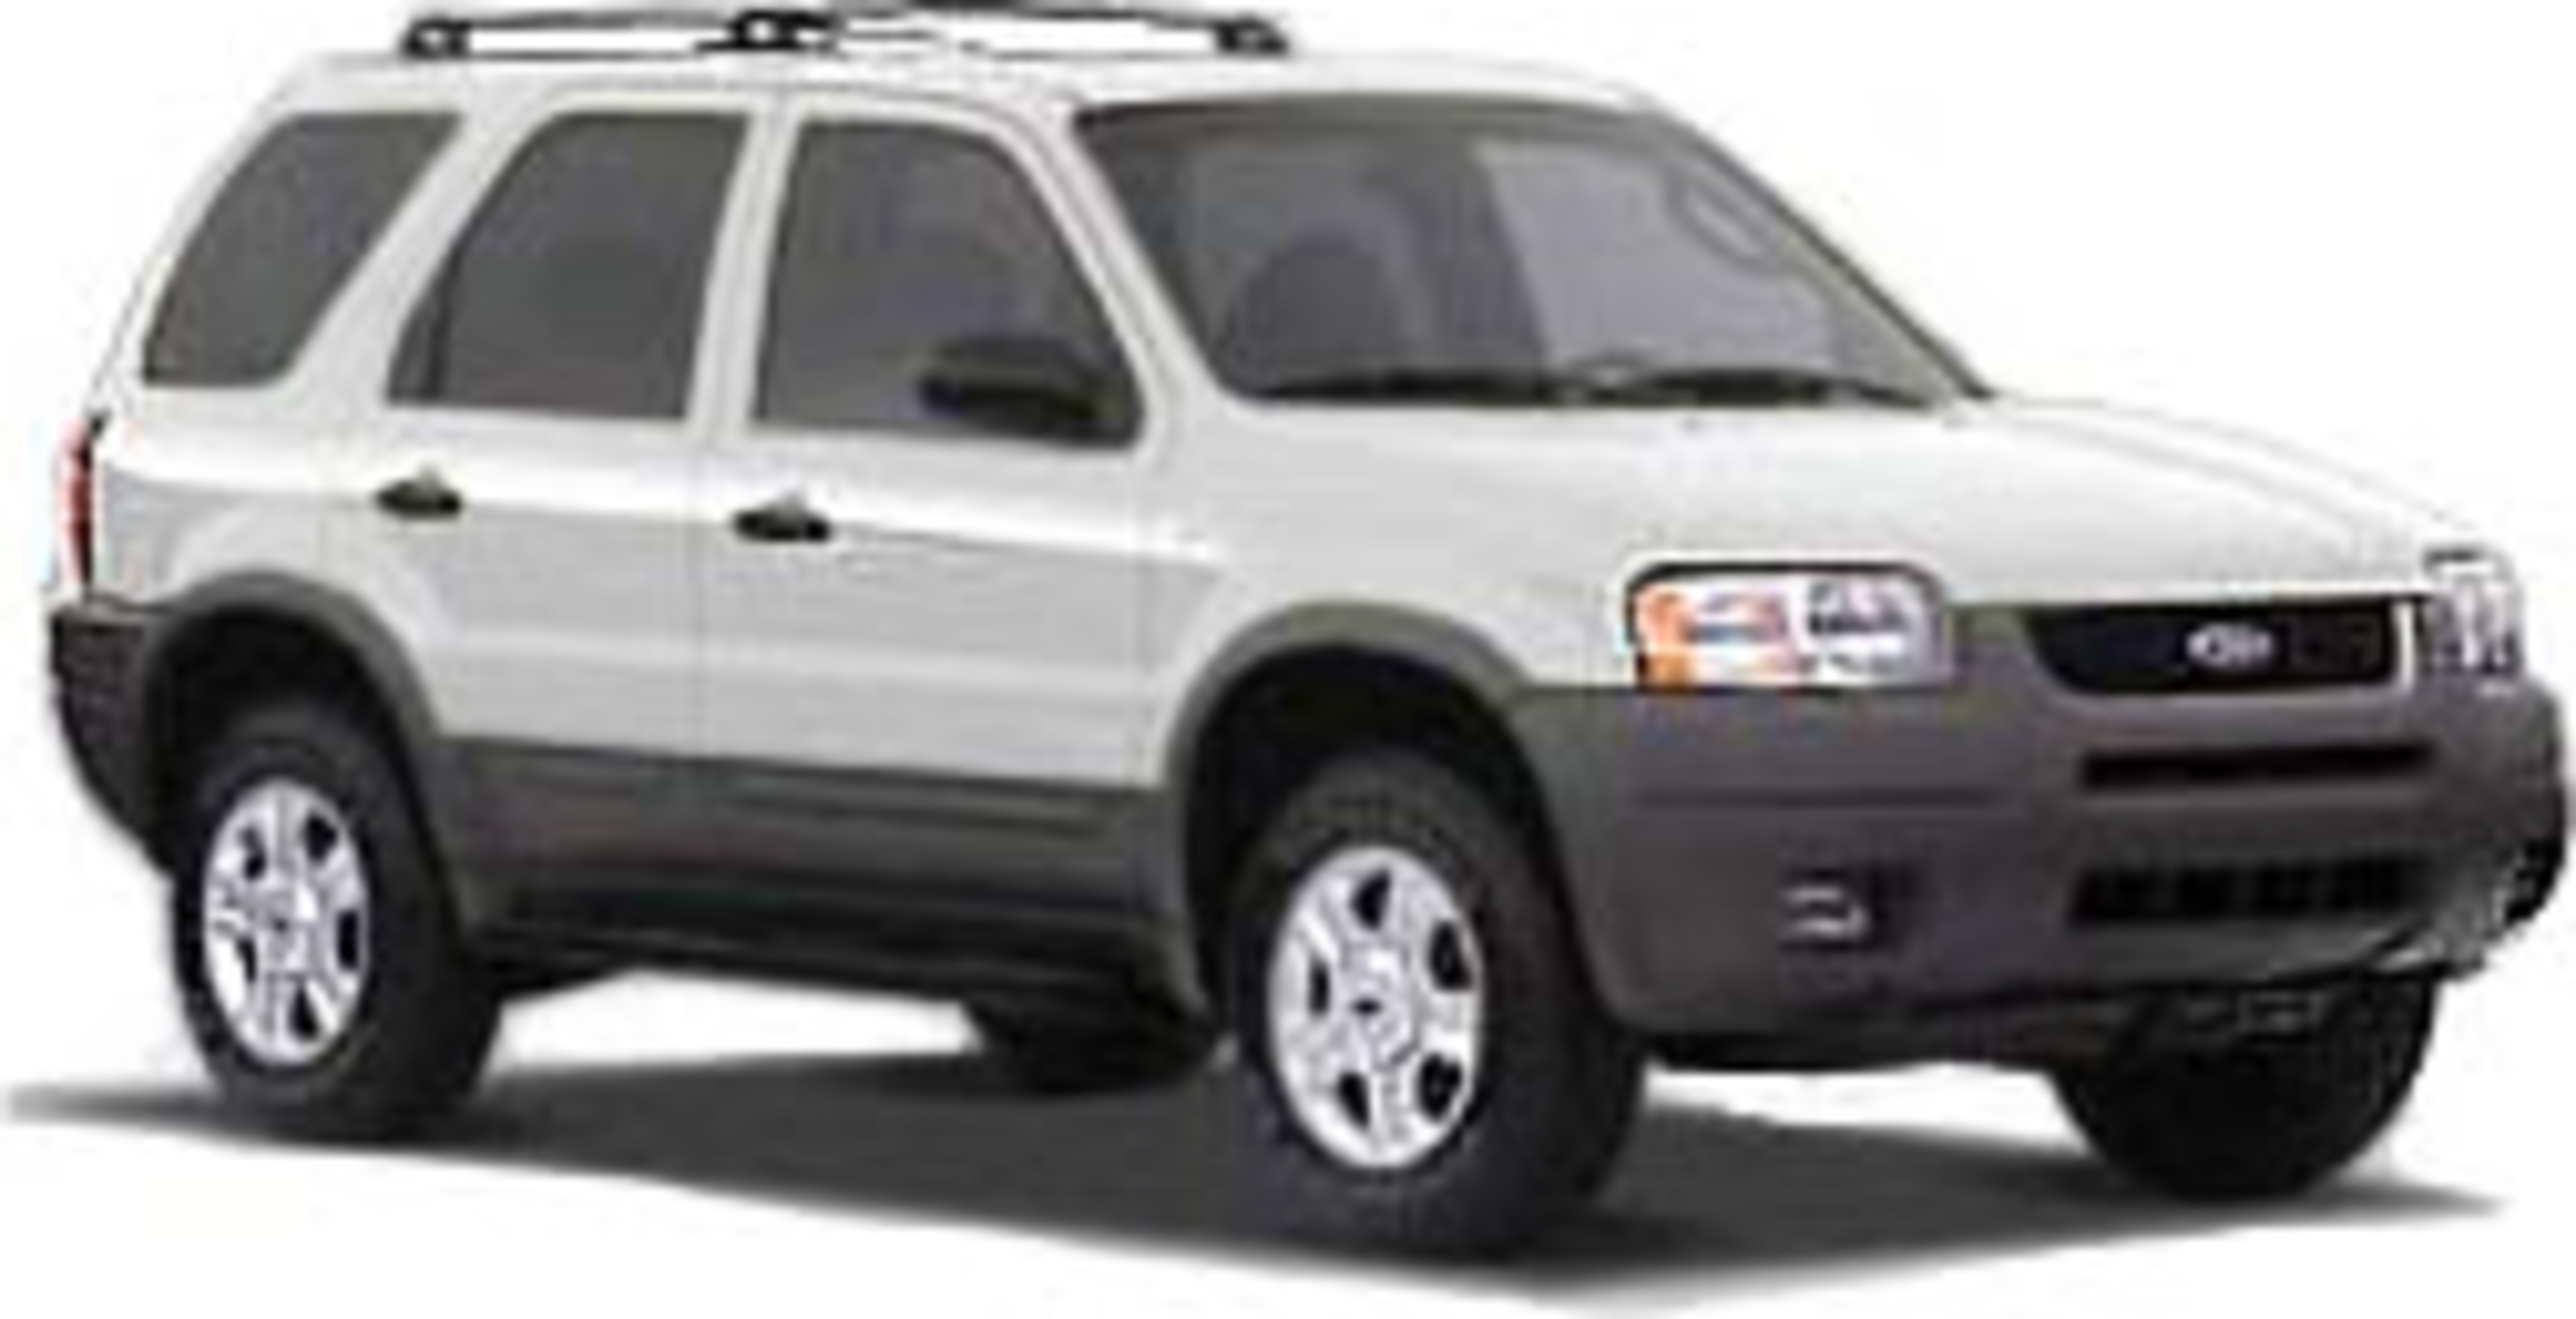 2002 Ford Escape Service and Repair Manual